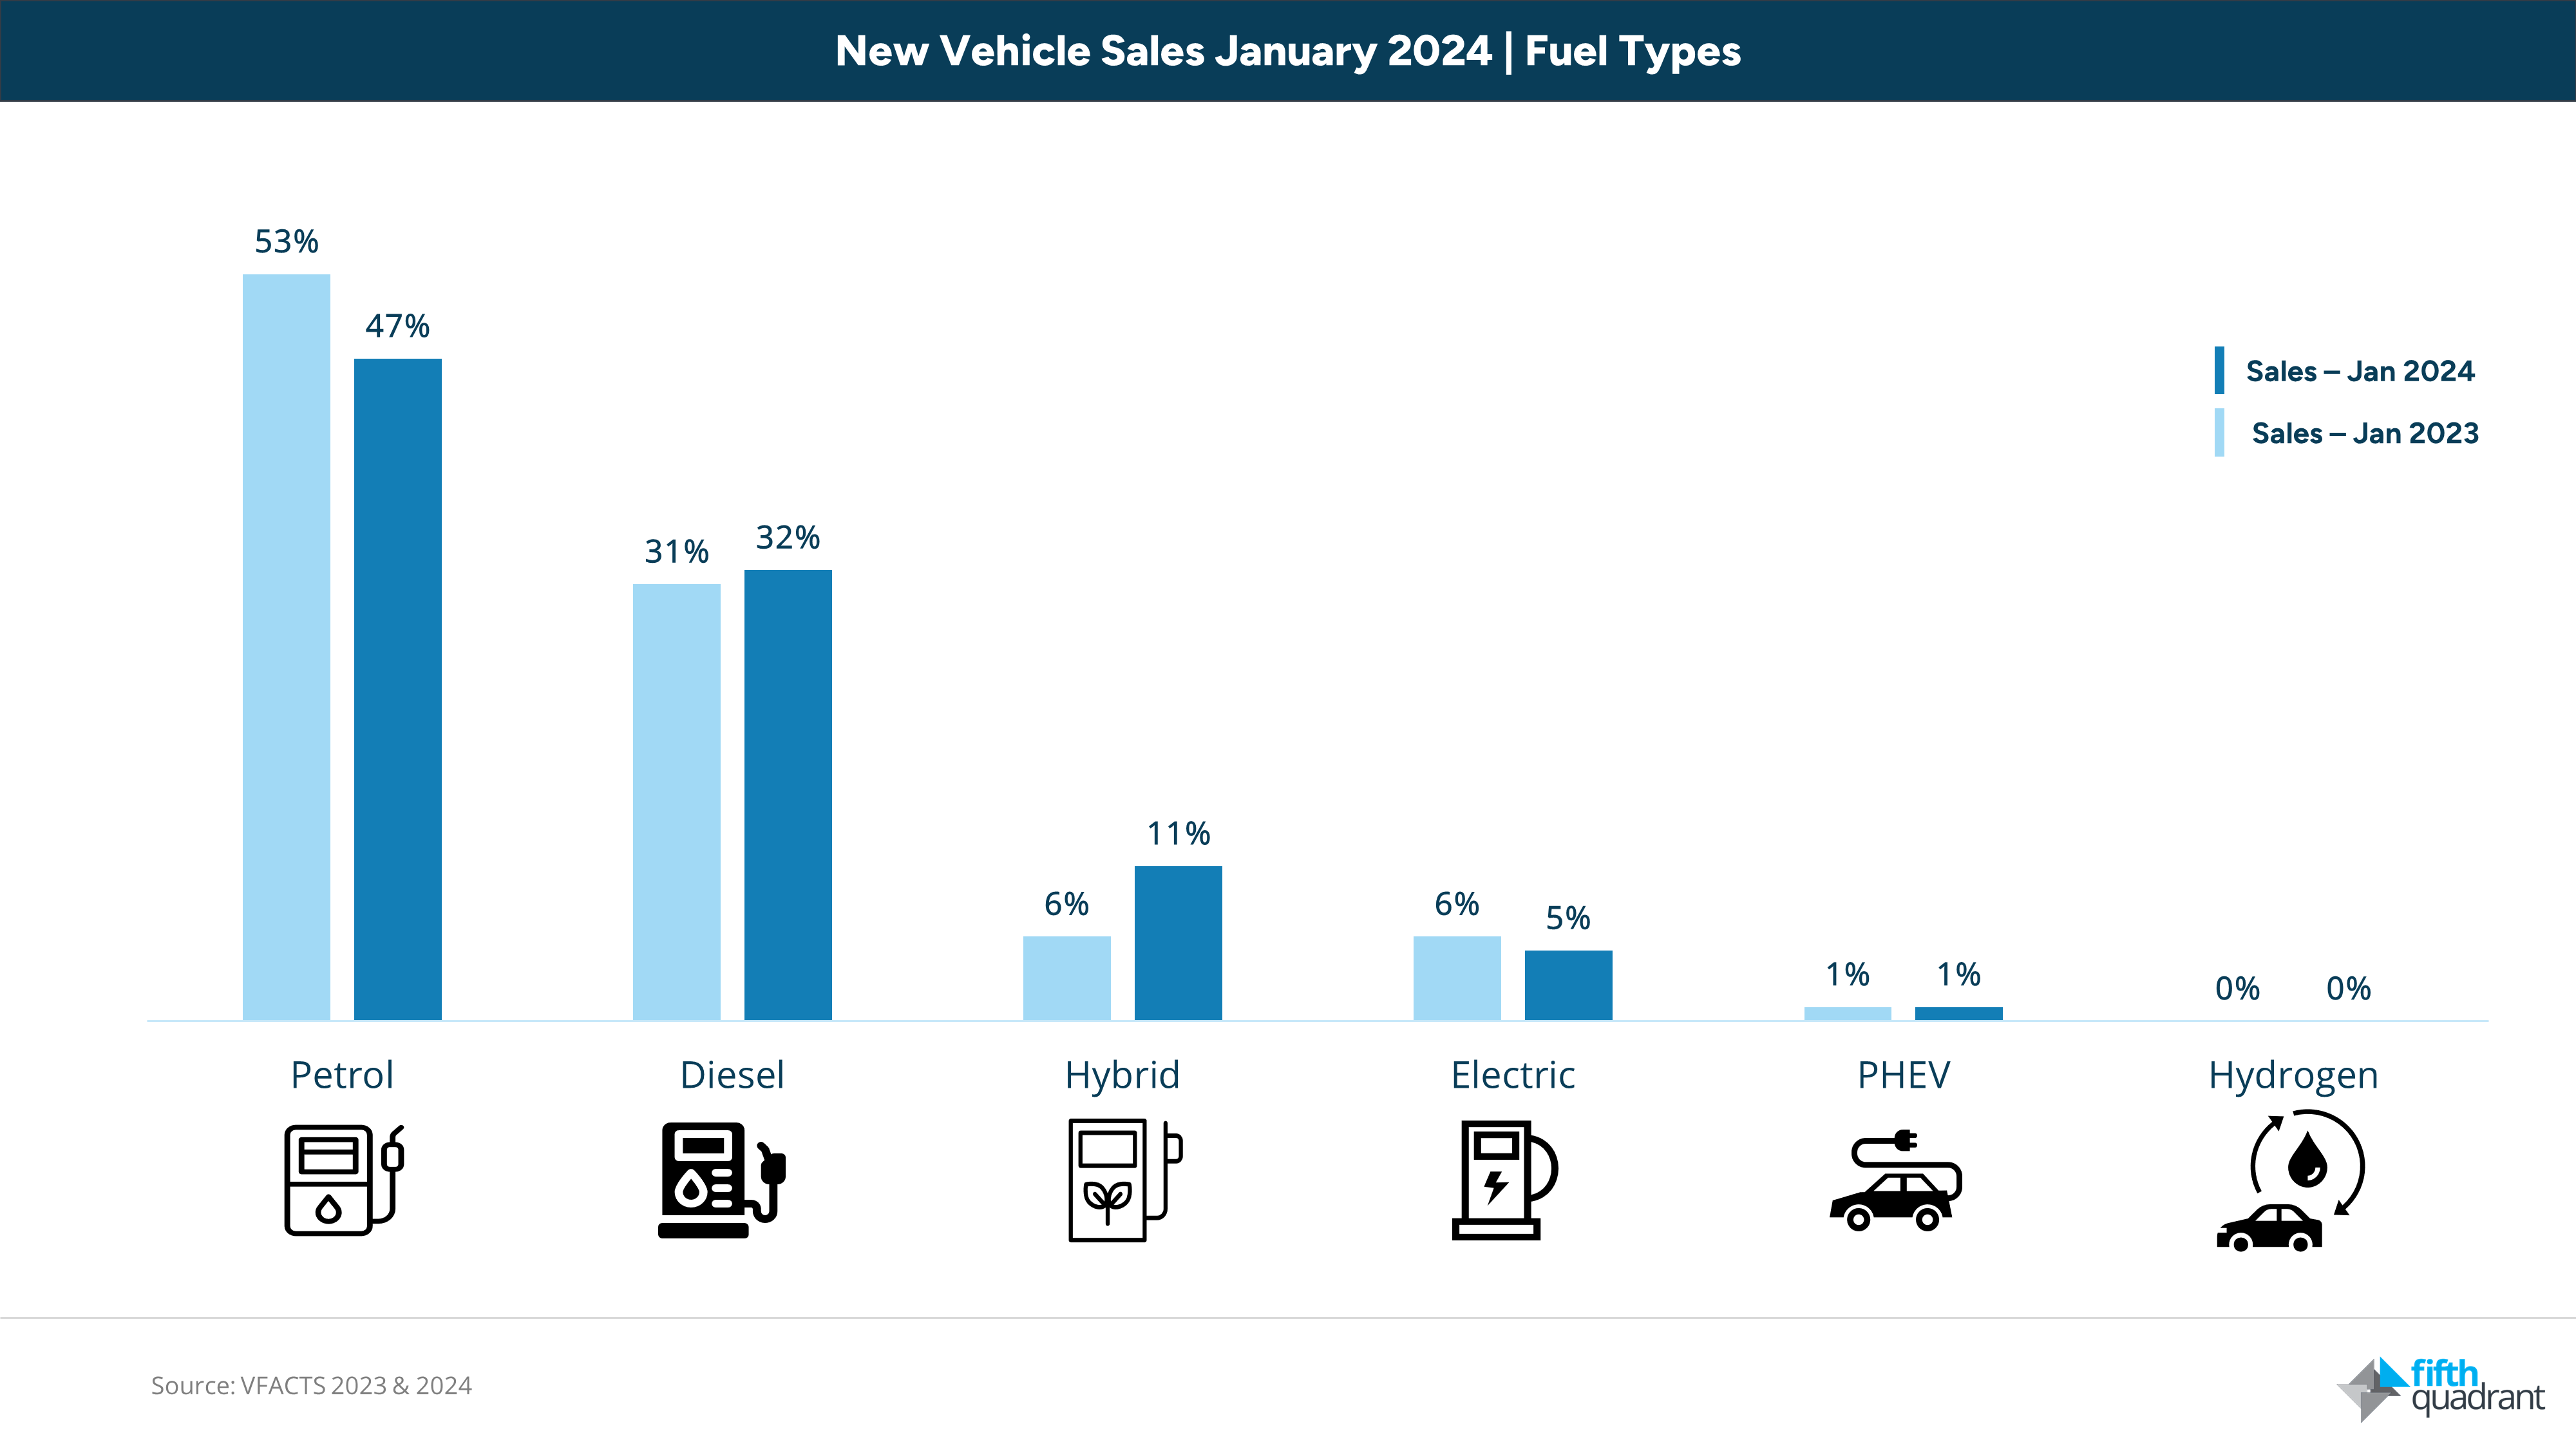 Hybrid Vehicles make up 11% of the new vehicles sold in Australia in January 2024. 